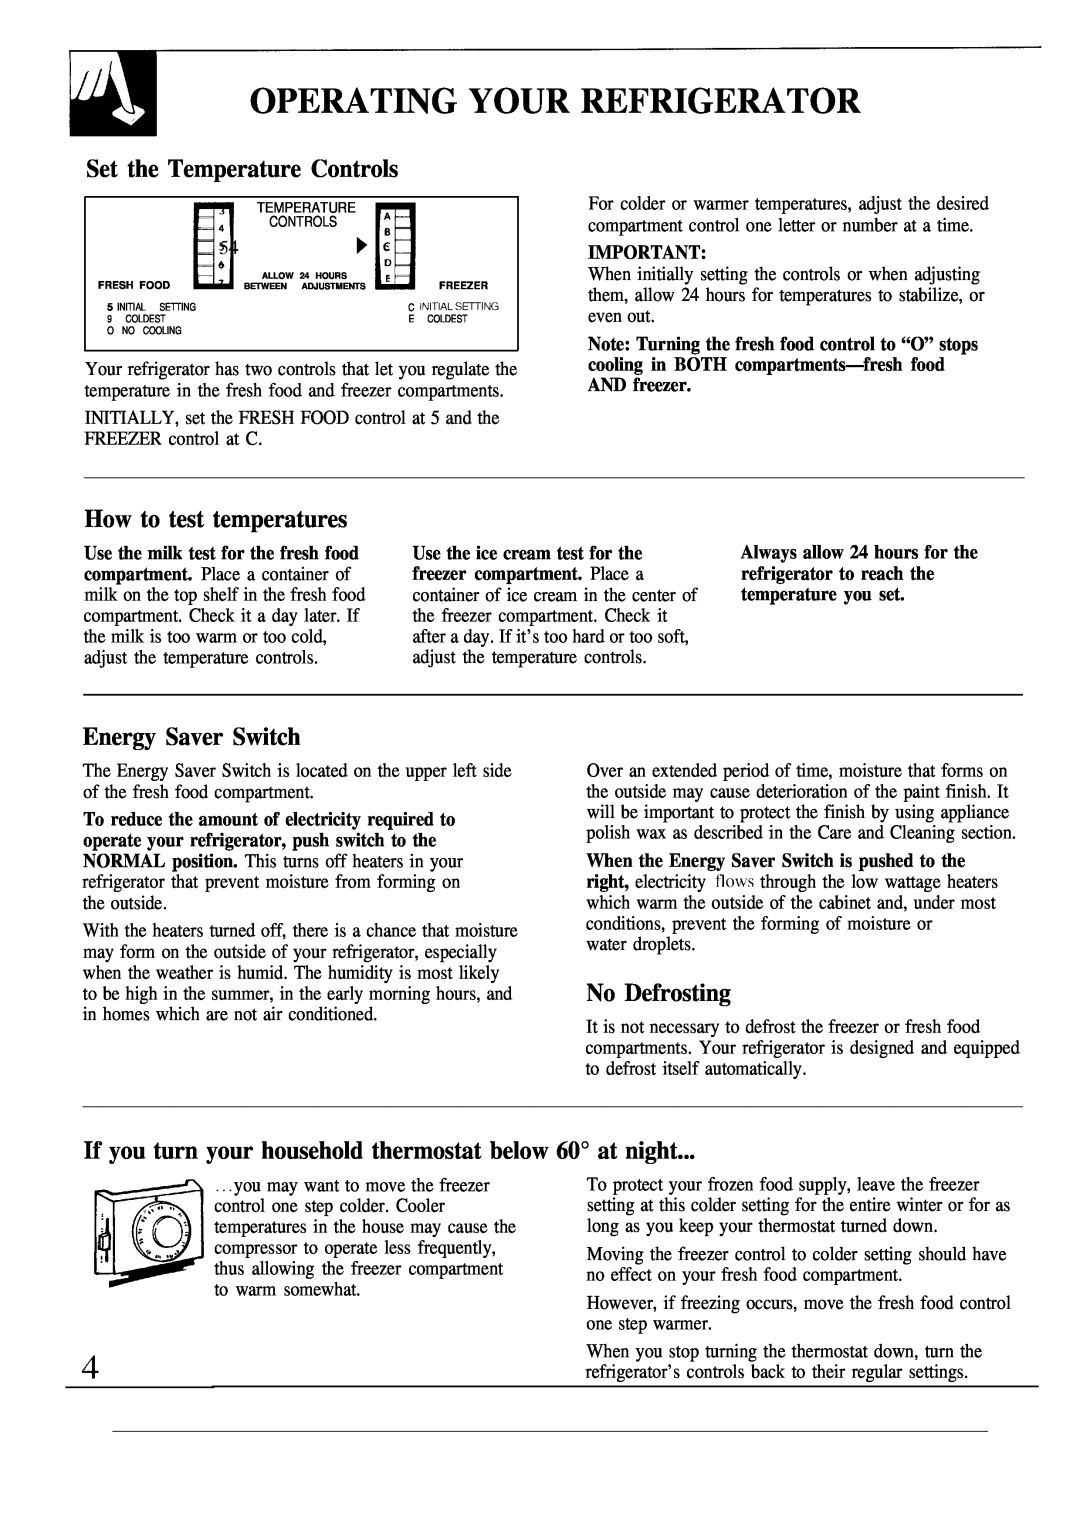 GE TBX12 Operating Your Refrigerator, Set the Temperature Controls, How to test temperatures, Energy Saver Switch 